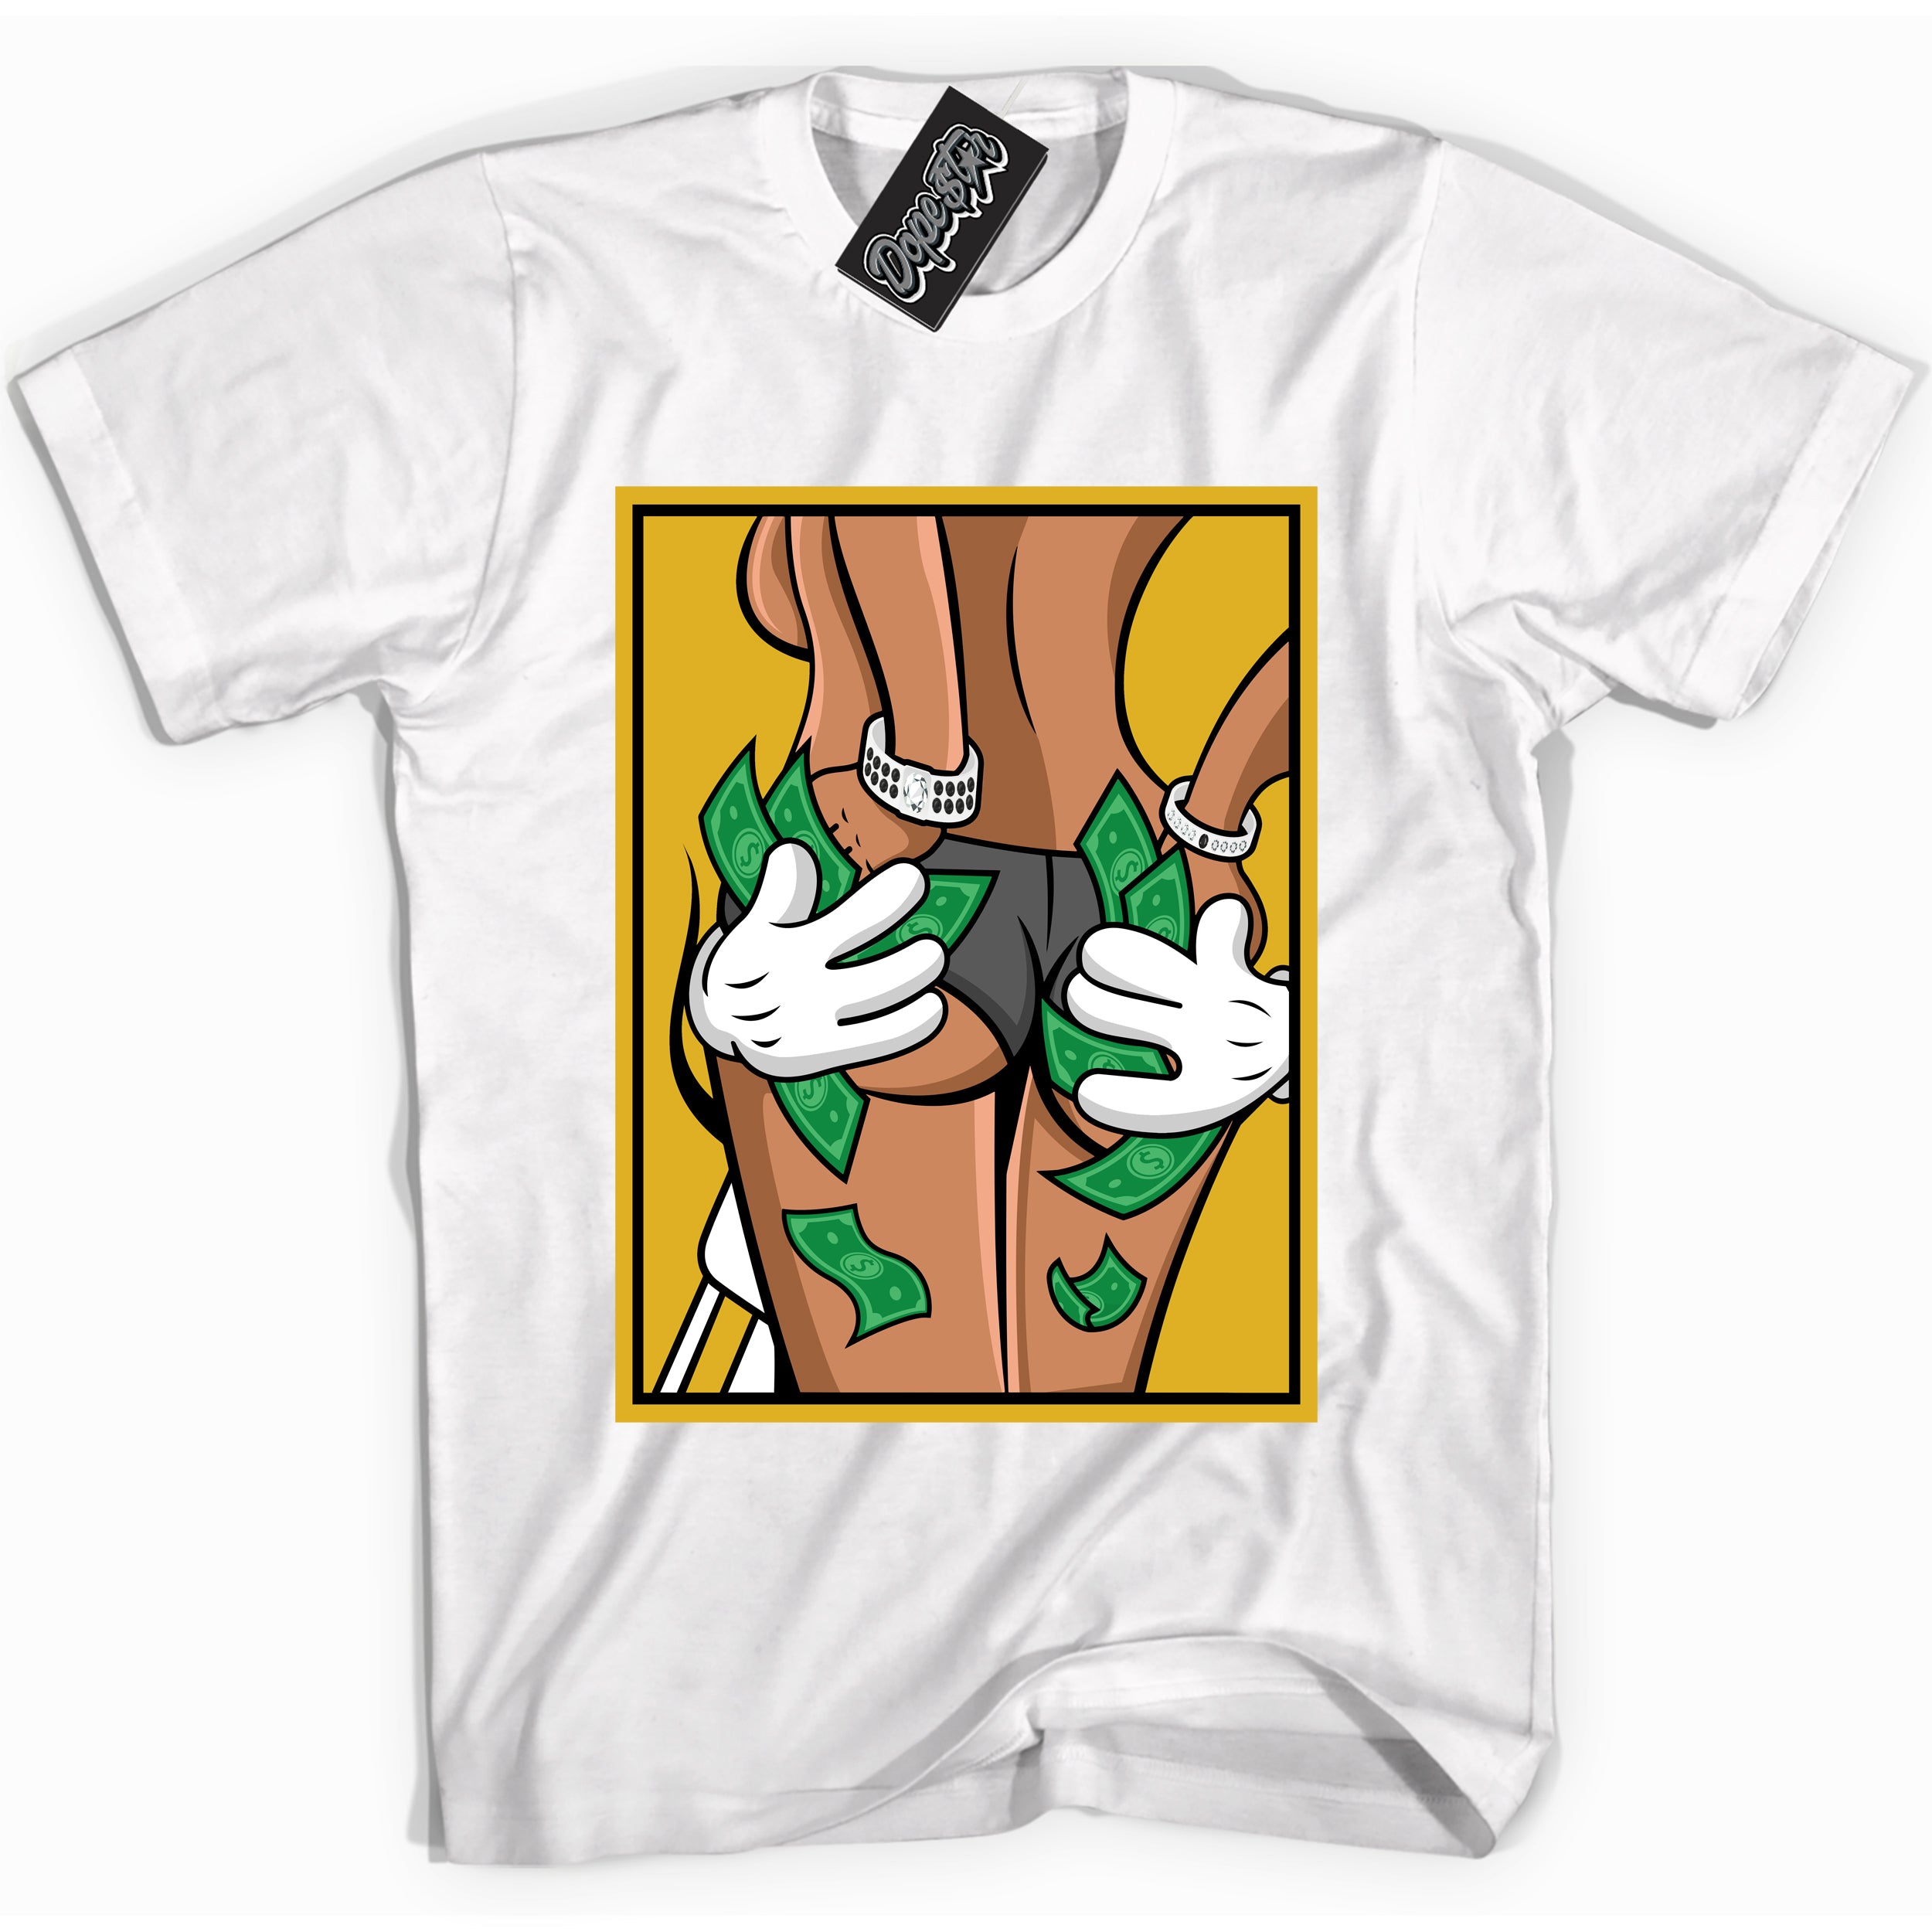 Cool White Shirt with “ Money Hands” design that perfectly matches Yellow Ochre 6s Sneakers.